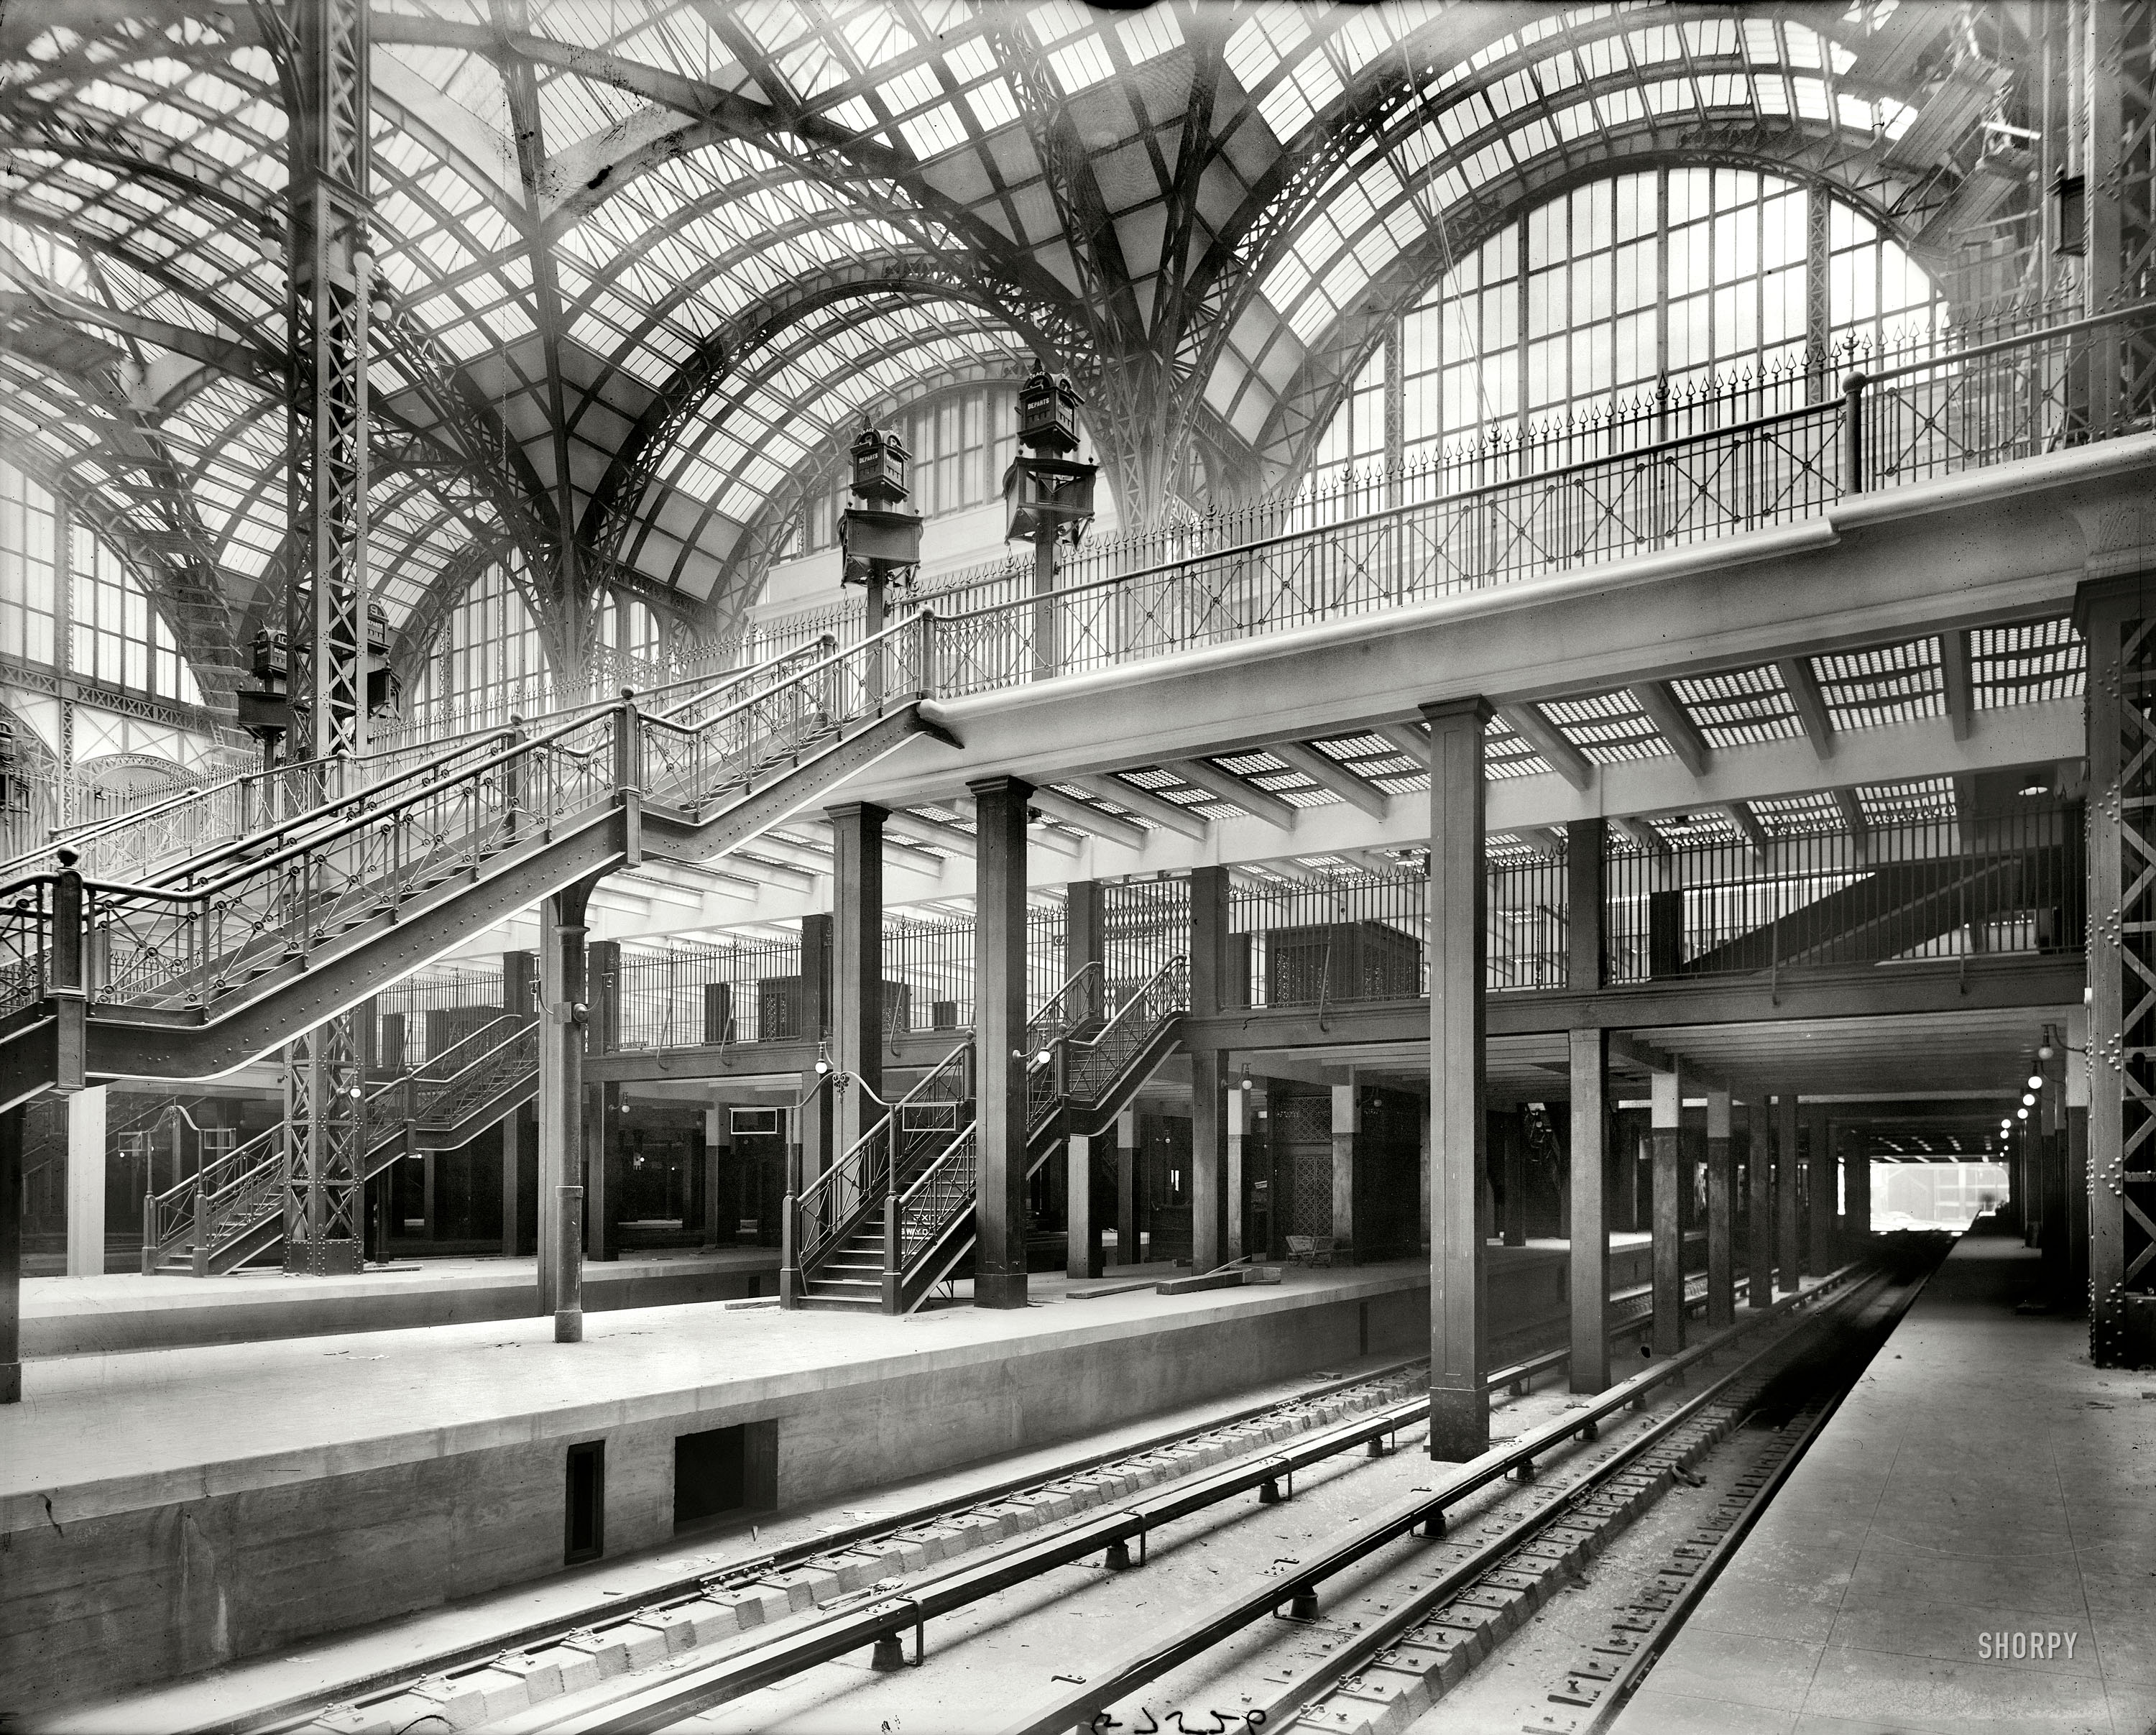 New York circa 1910. "Pennsylvania Station, track level, showing stairway and elevators." 8x10 inch glass negative, Detroit Publishing Company. View full size.